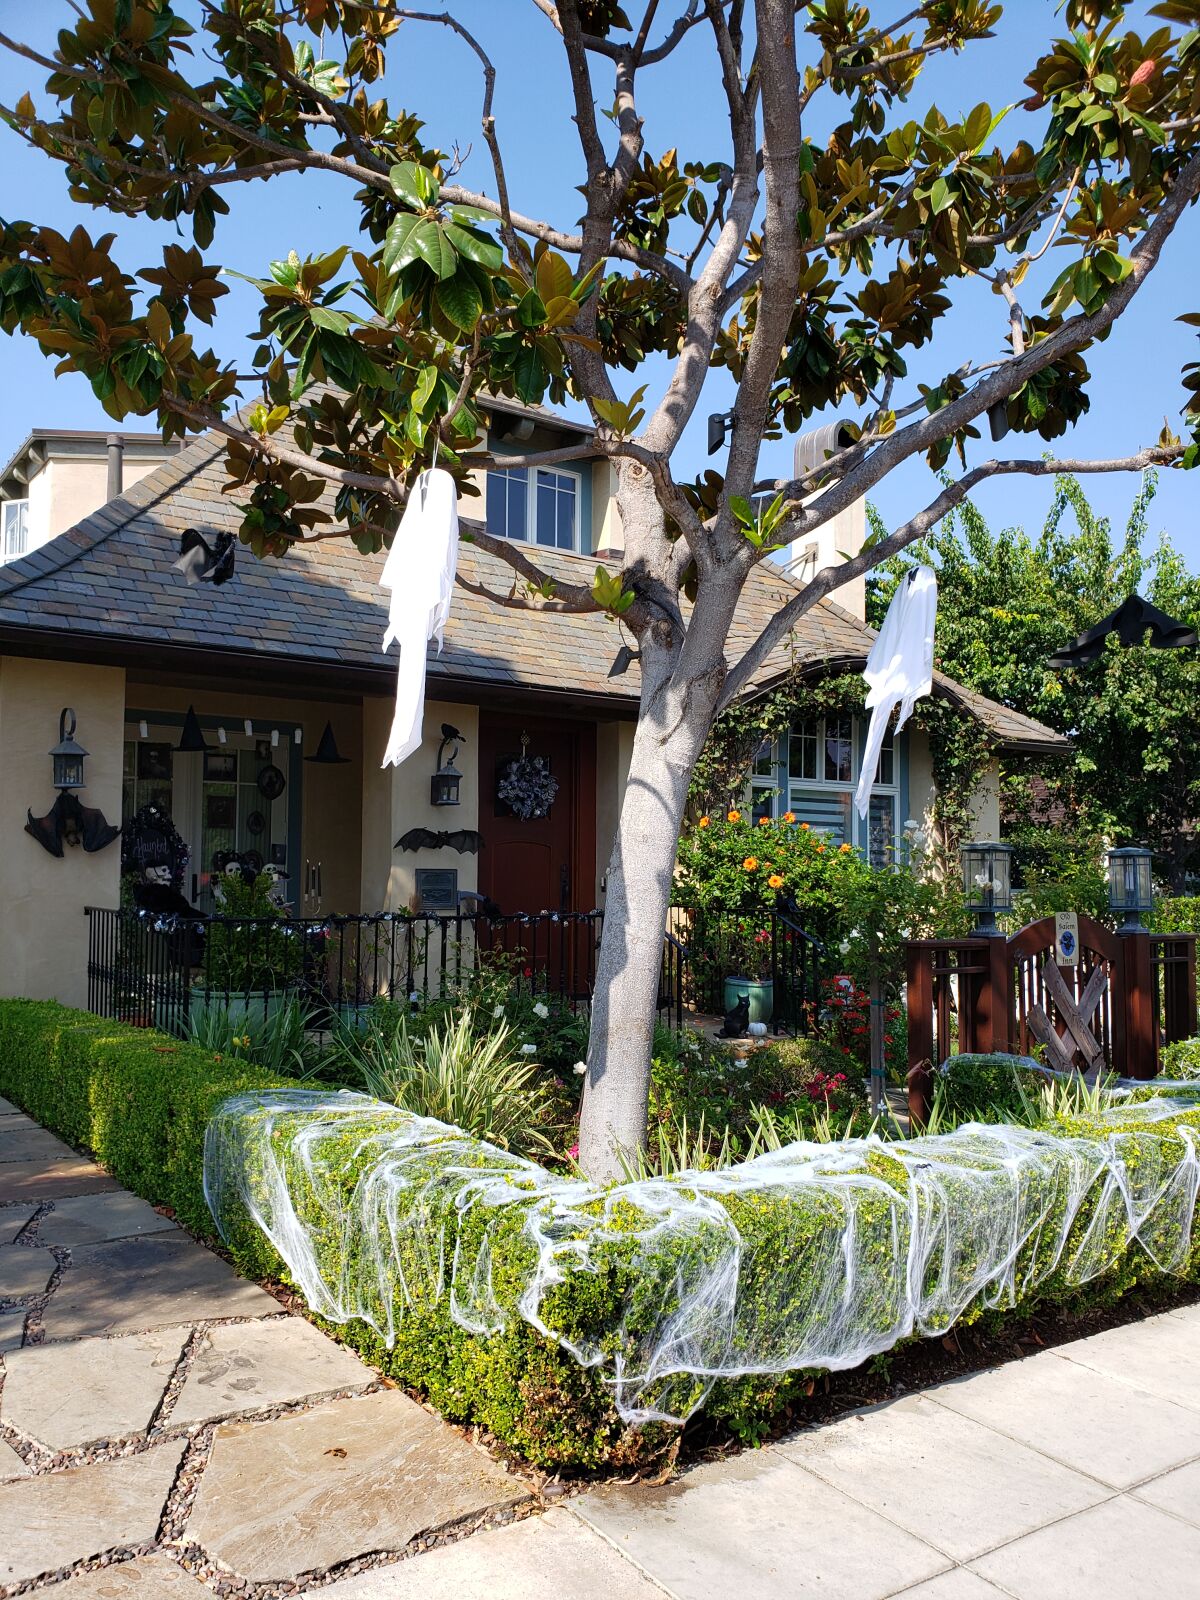 Ghosts, spider webs and other Halloween essentials adorn this Barber Tract house.